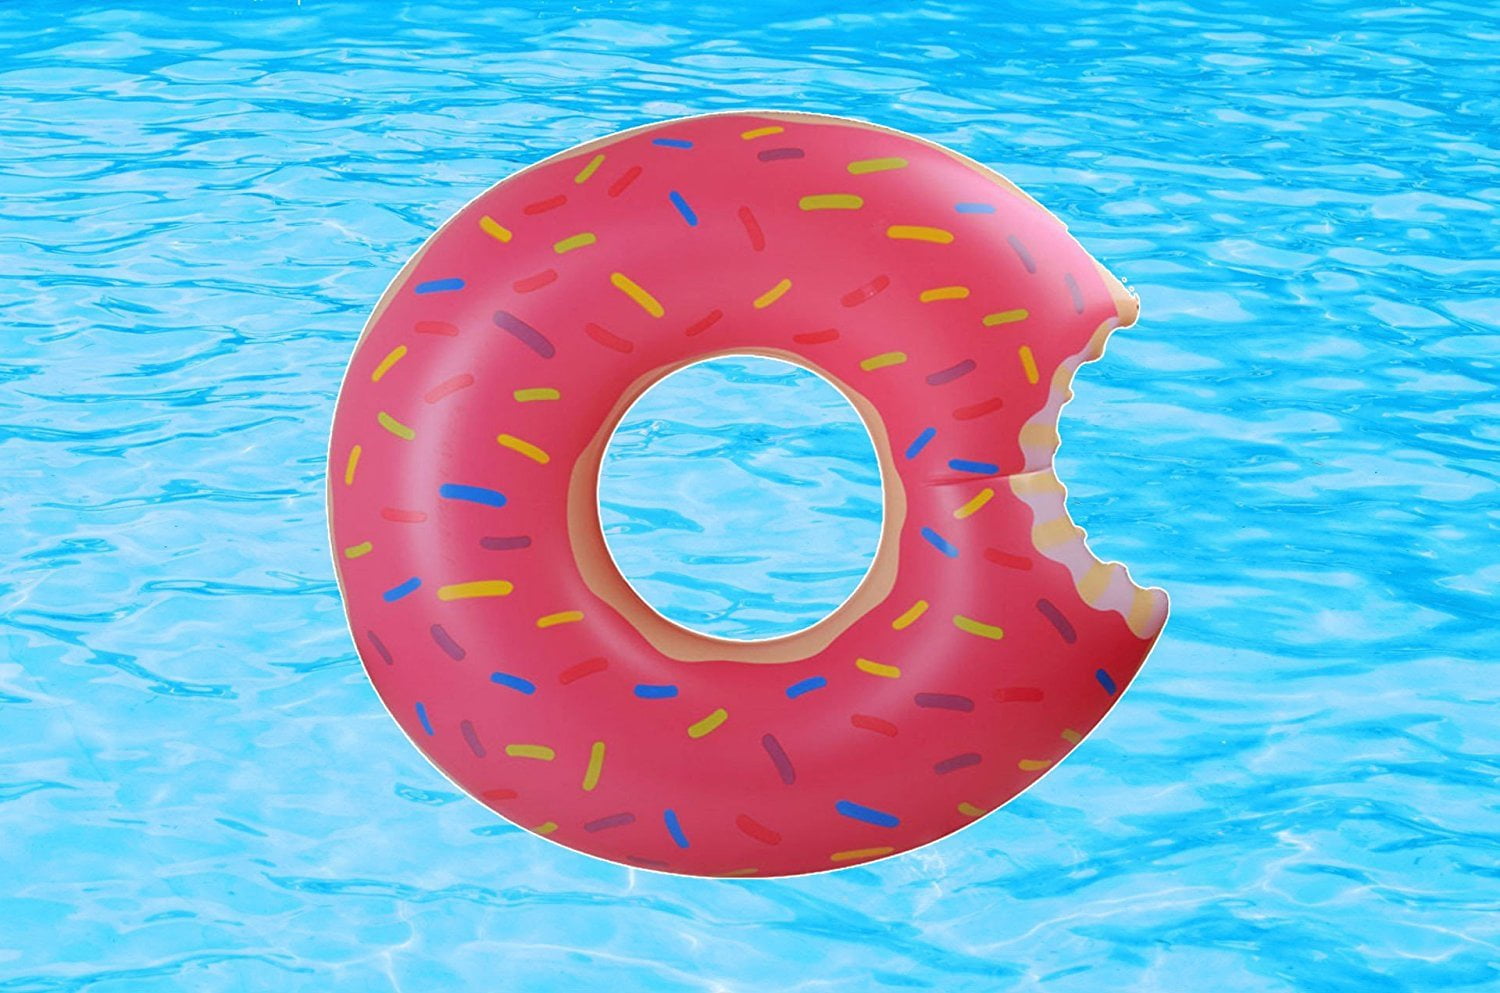 Deflated size: 53x50 Summer Palms Jumbo Frosted Donut Tube Float 135x127 cm 122x119x38 cm ;  Inflated Size: 48x47x15